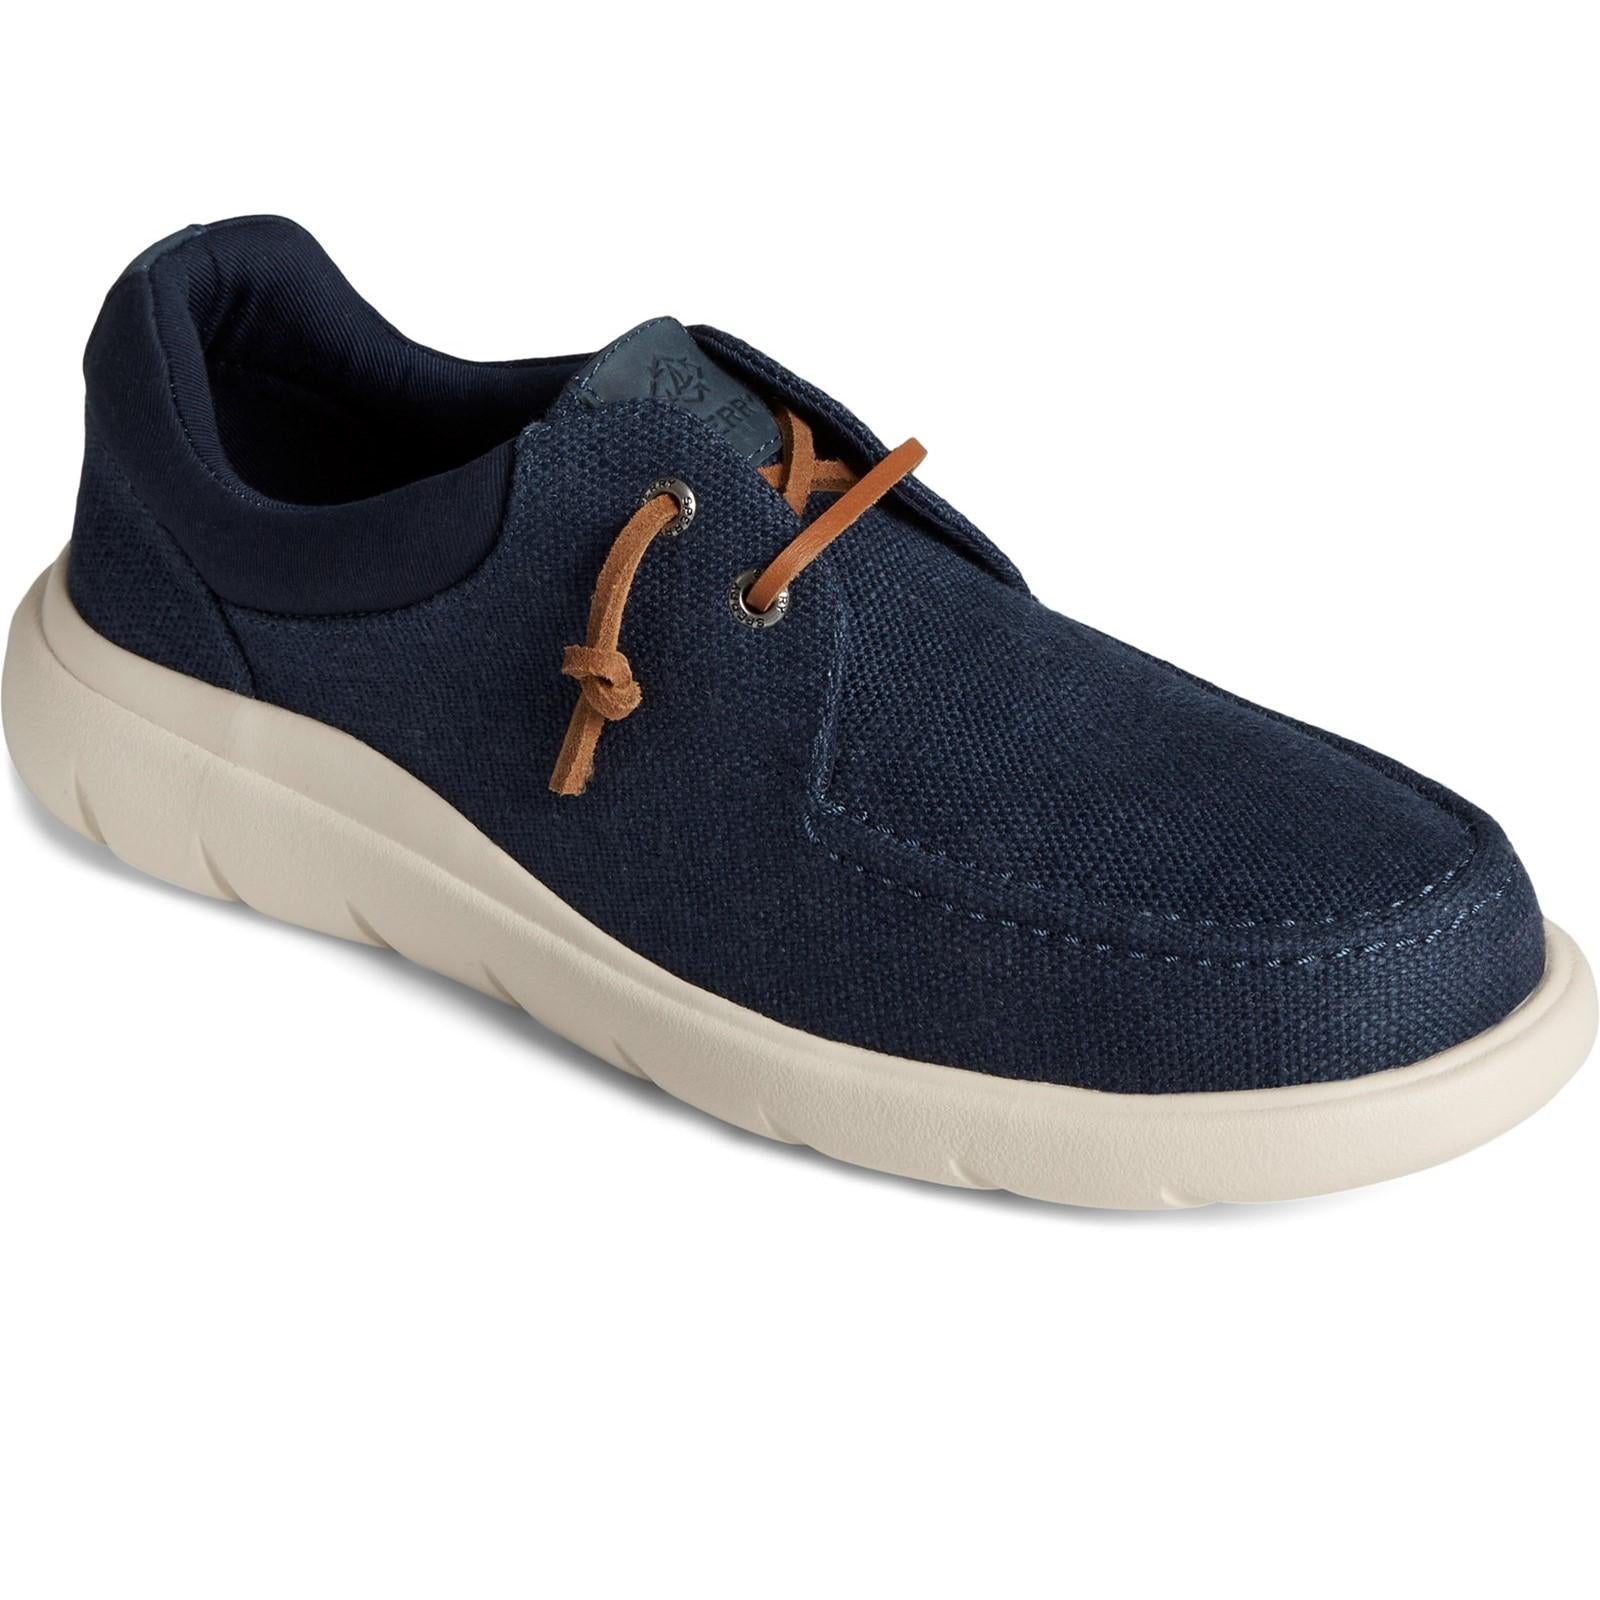 Sperry Top-sider Capt Moc Shoes